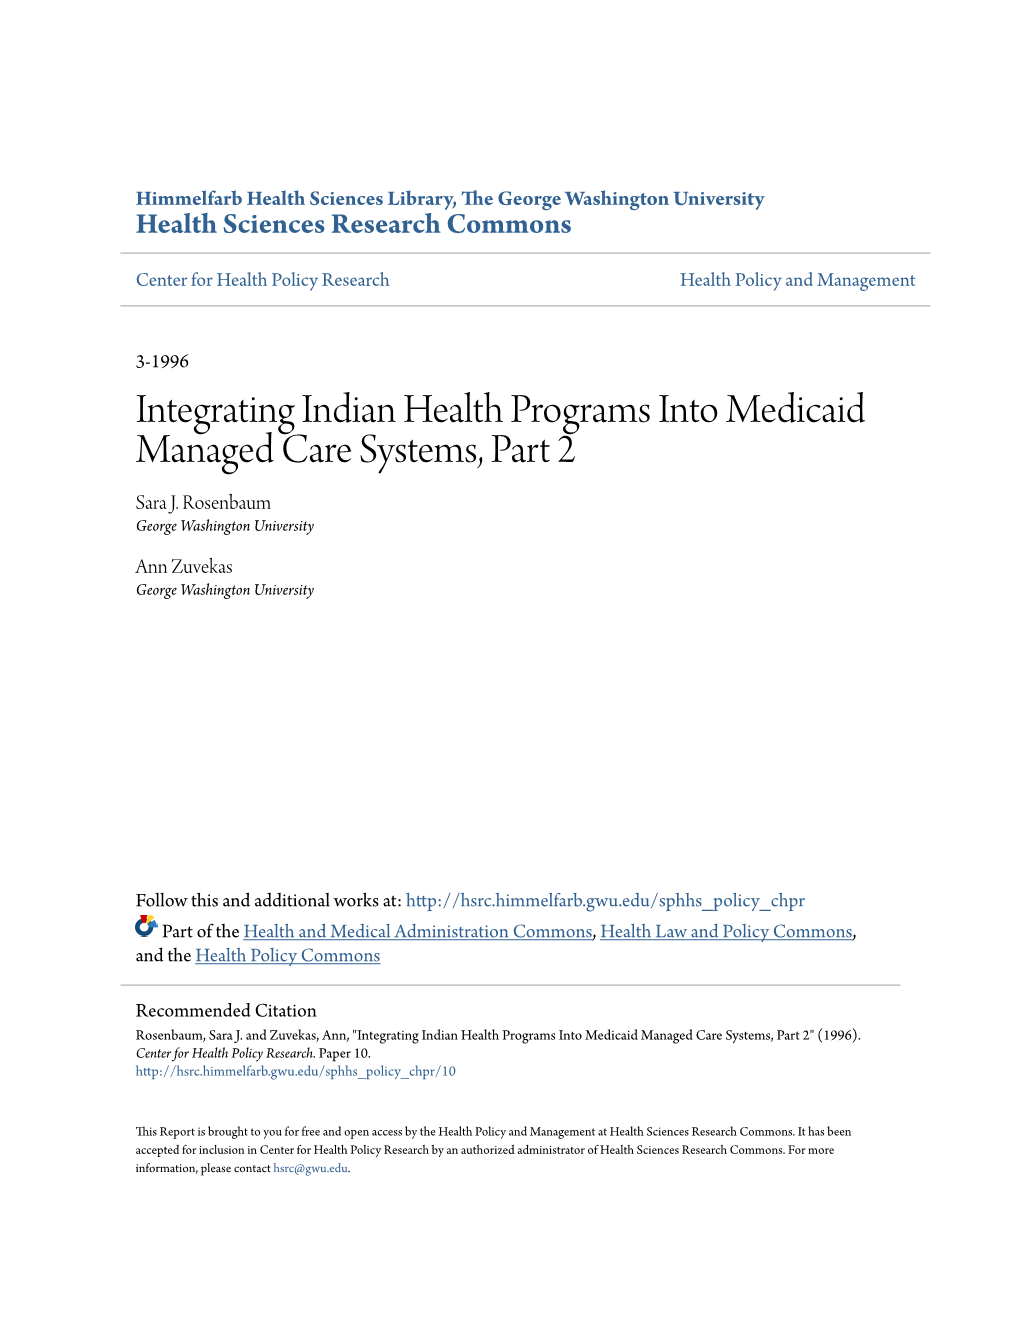 Integrating Indian Health Programs Into Medicaid Managed Care Systems, Part 2 Sara J